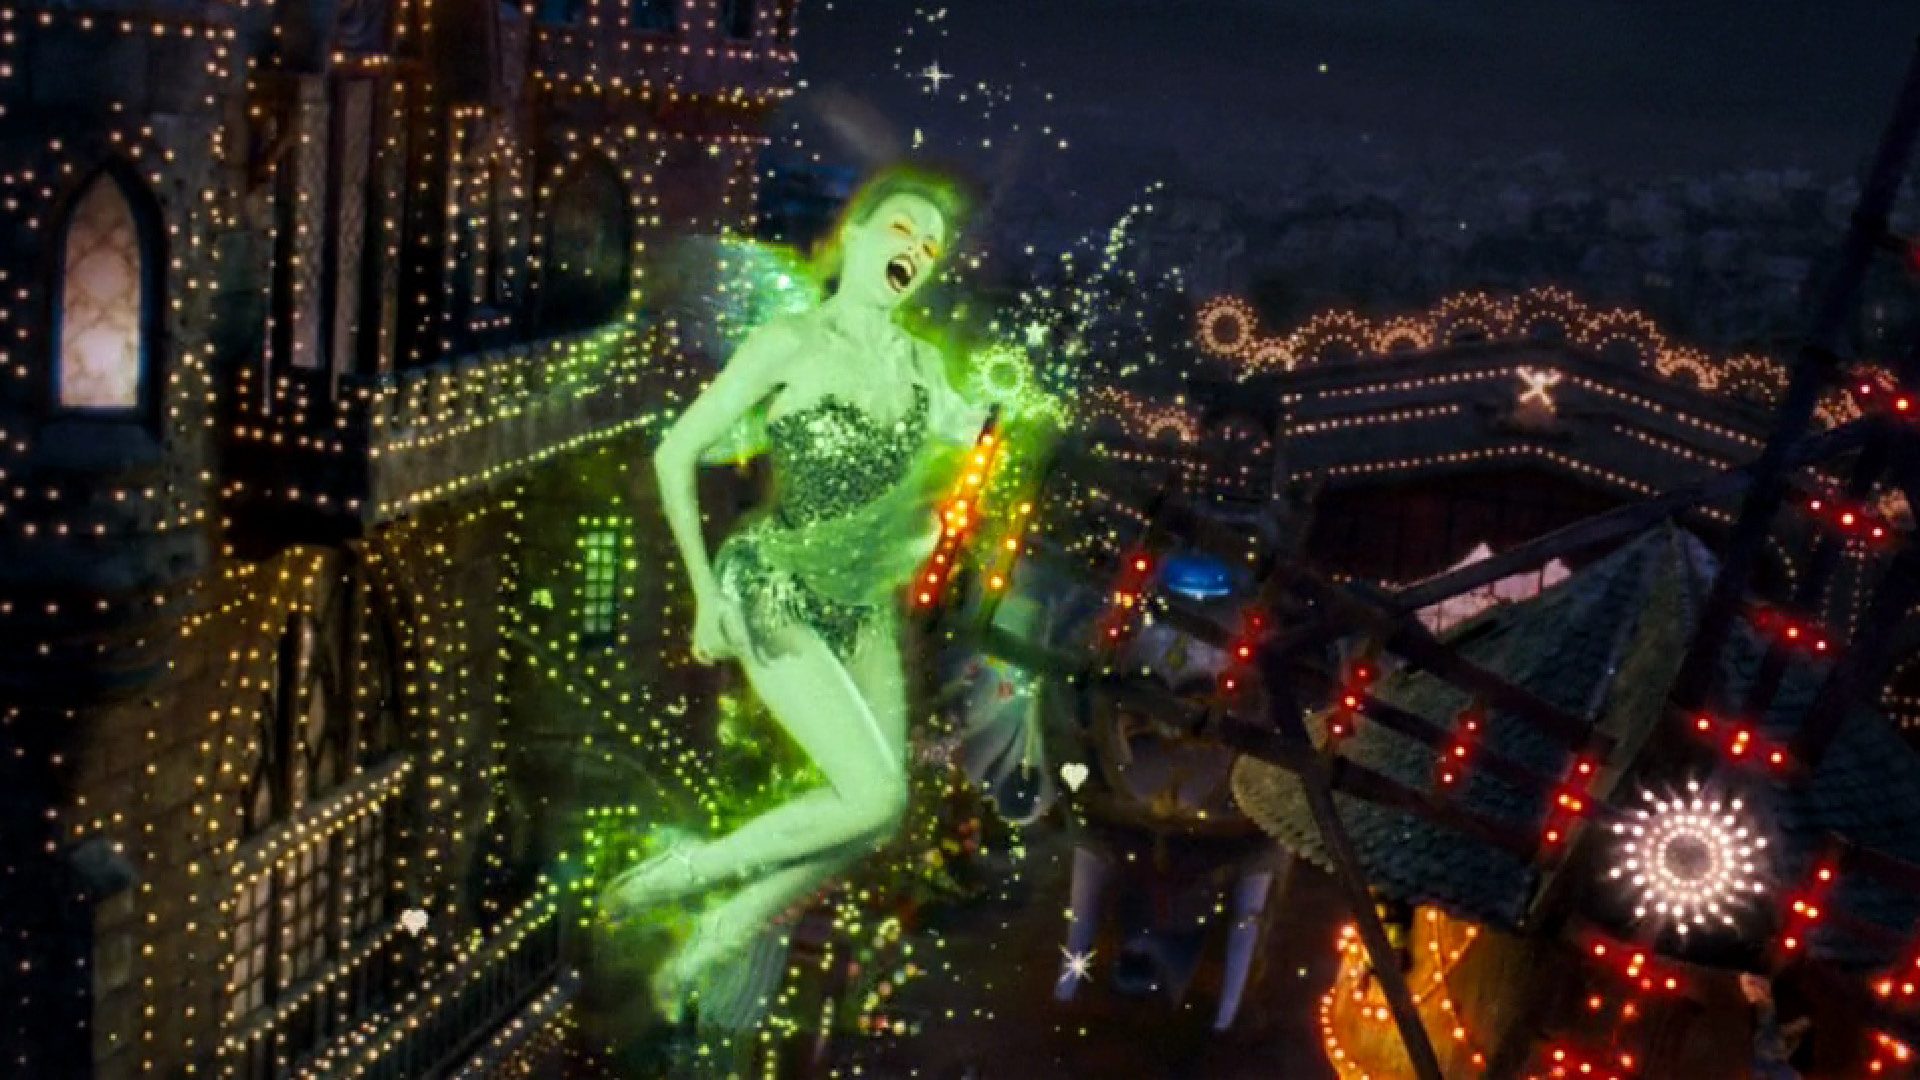 MOULIN ROUGE film still of a green fairy